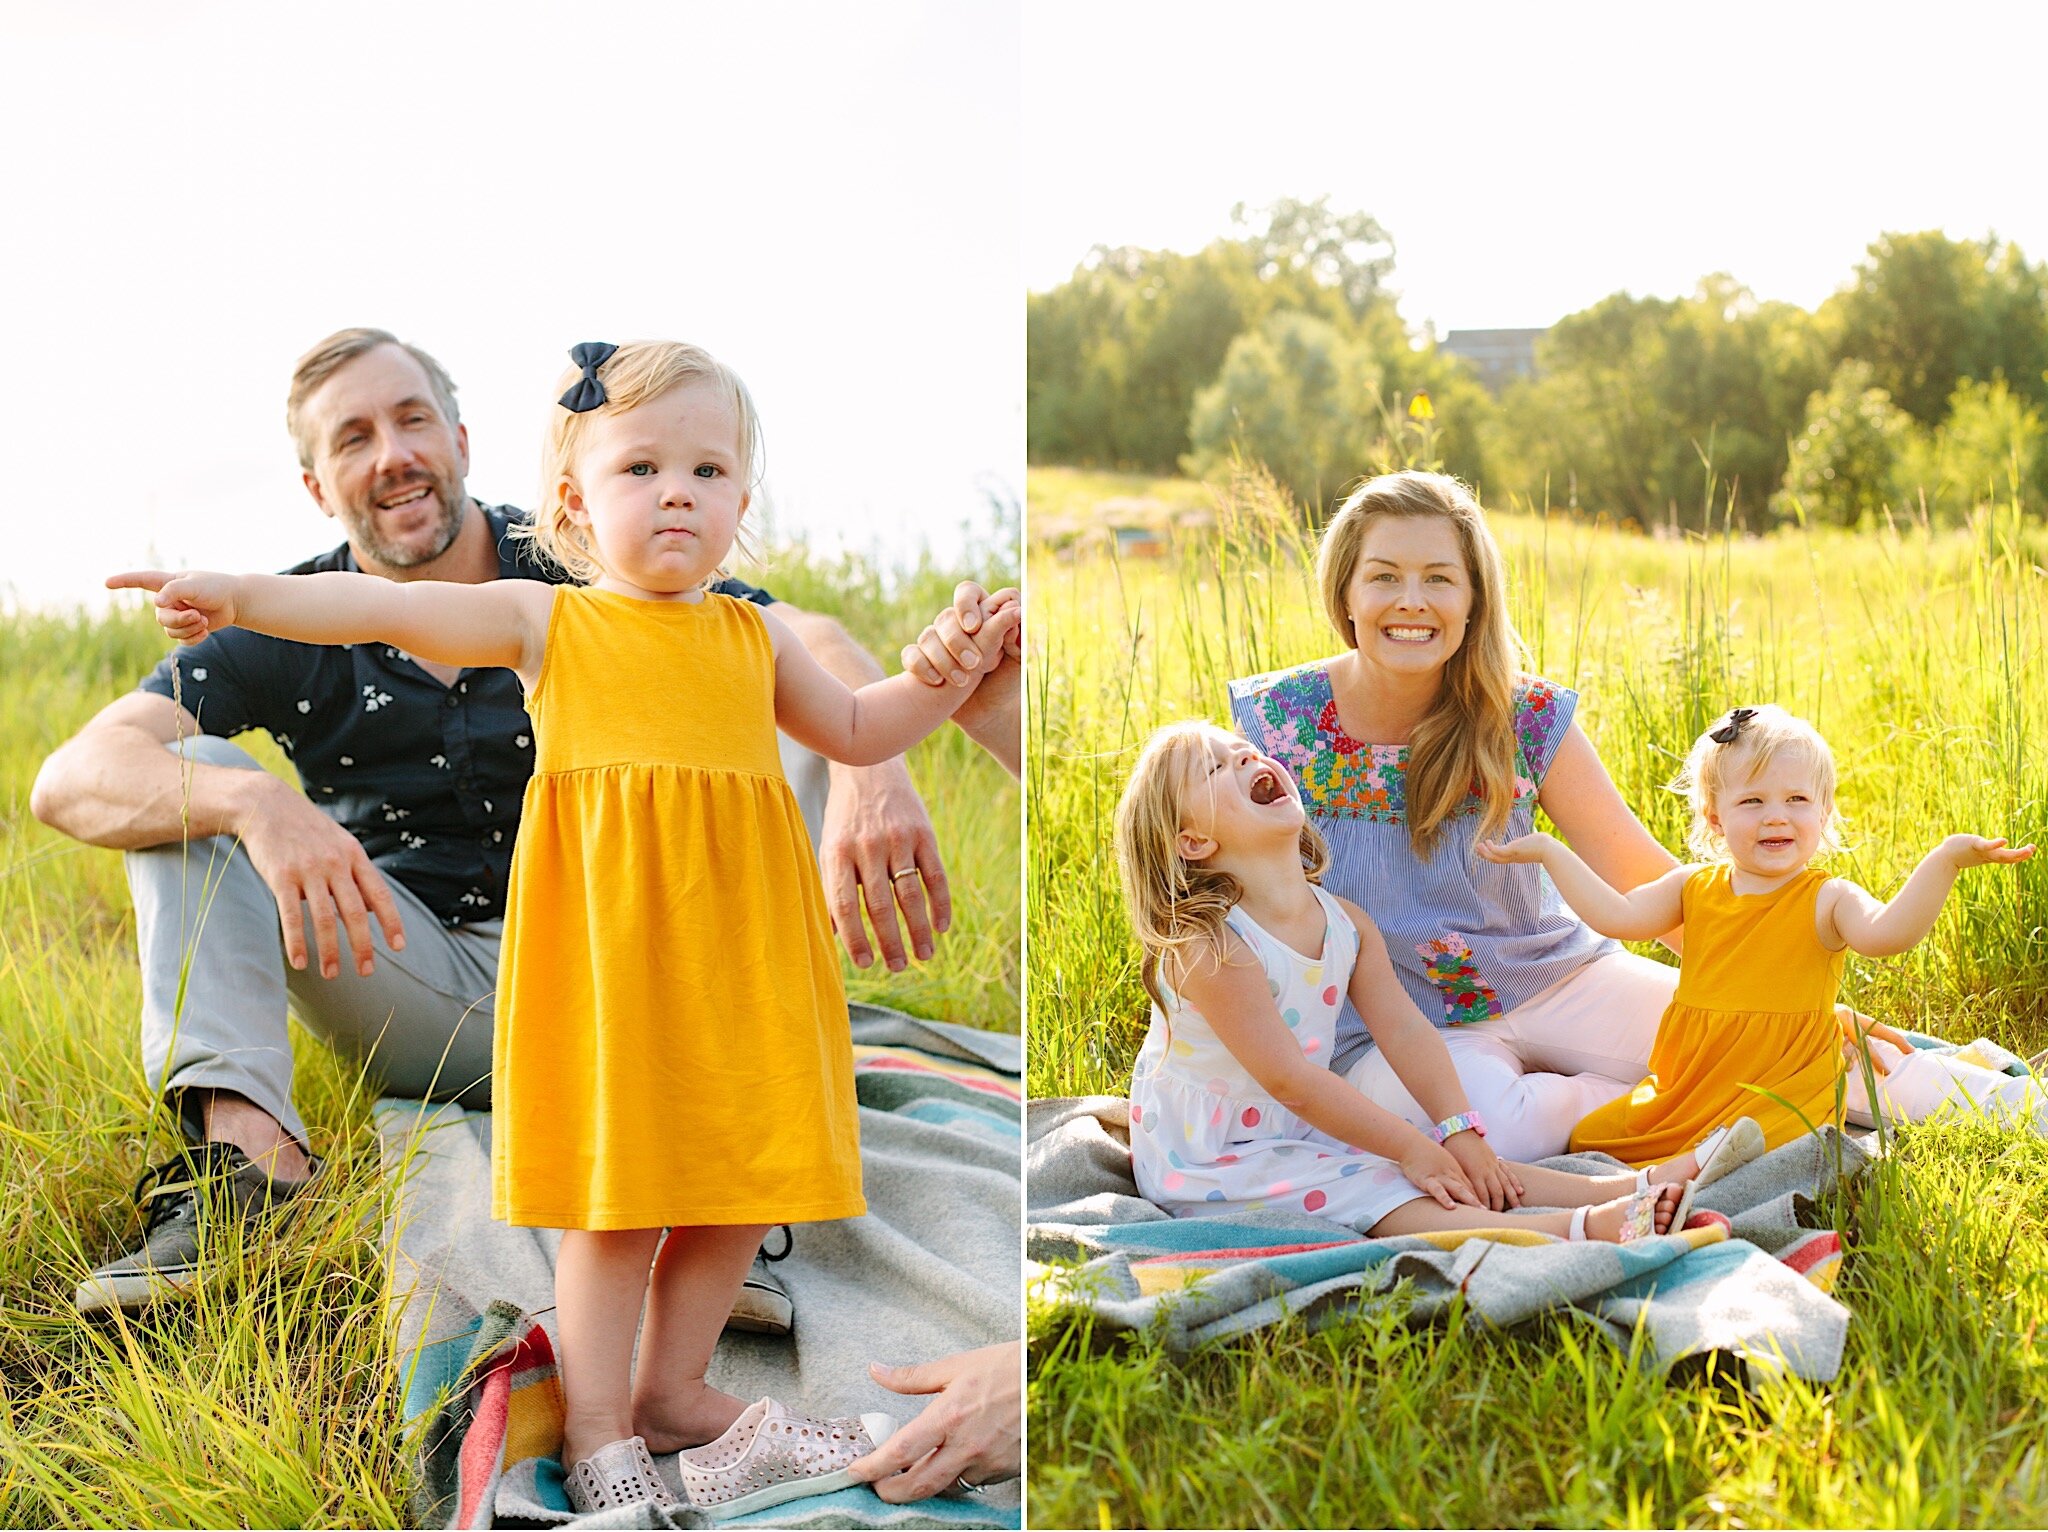 A family sitting together on a picnic blanket in a grassy field during a family photography session